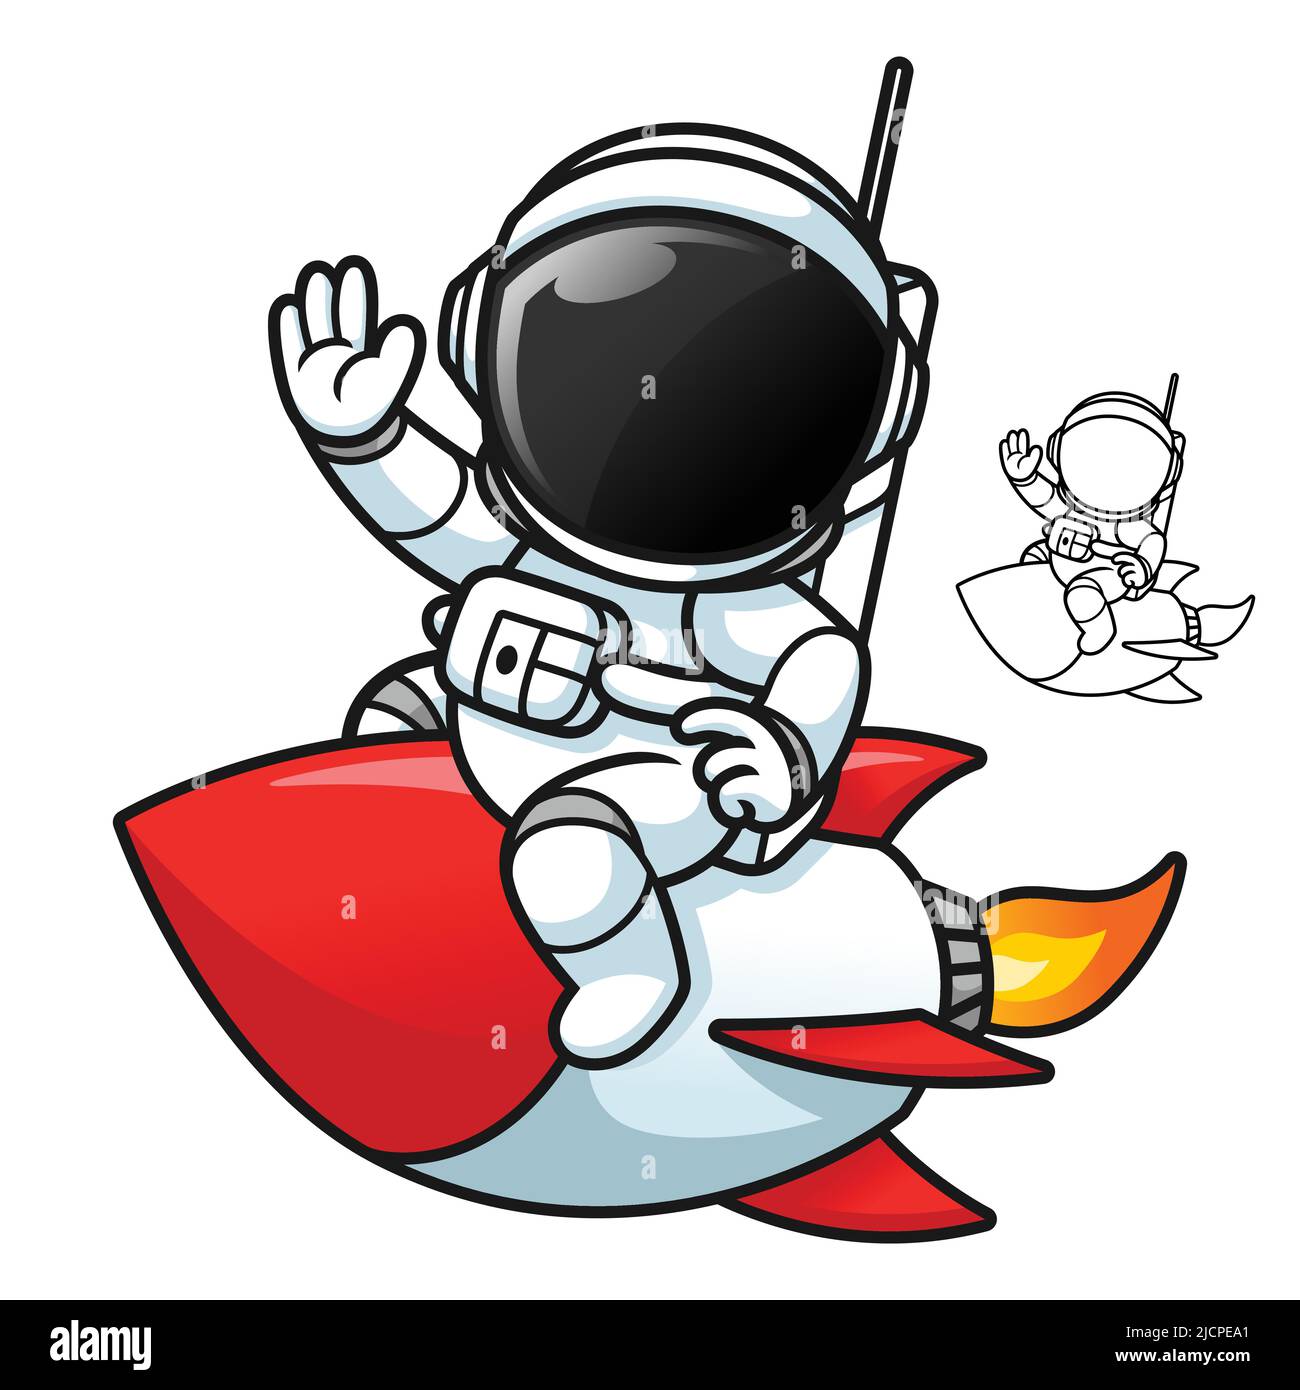 Cute Astronaut Riding a Rocket Waving His Hand with Black and White Line Art Drawing, Science Outer Space, Vector Character Illustration. Stock Vector